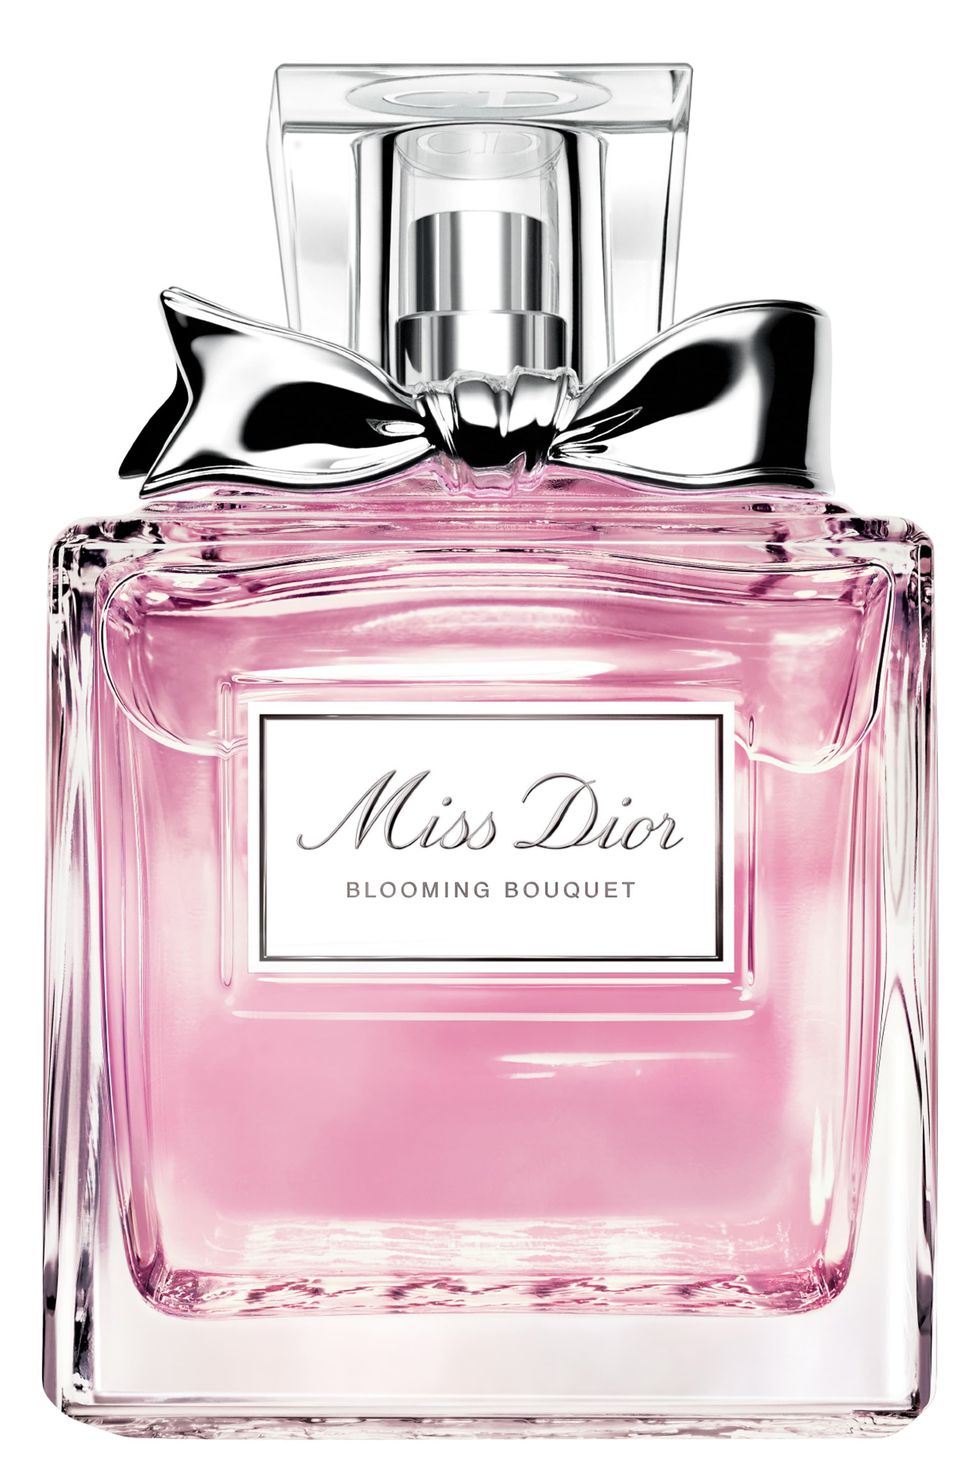 What Are The Most Popular Scents Ladies Like To Wear In Perfumes